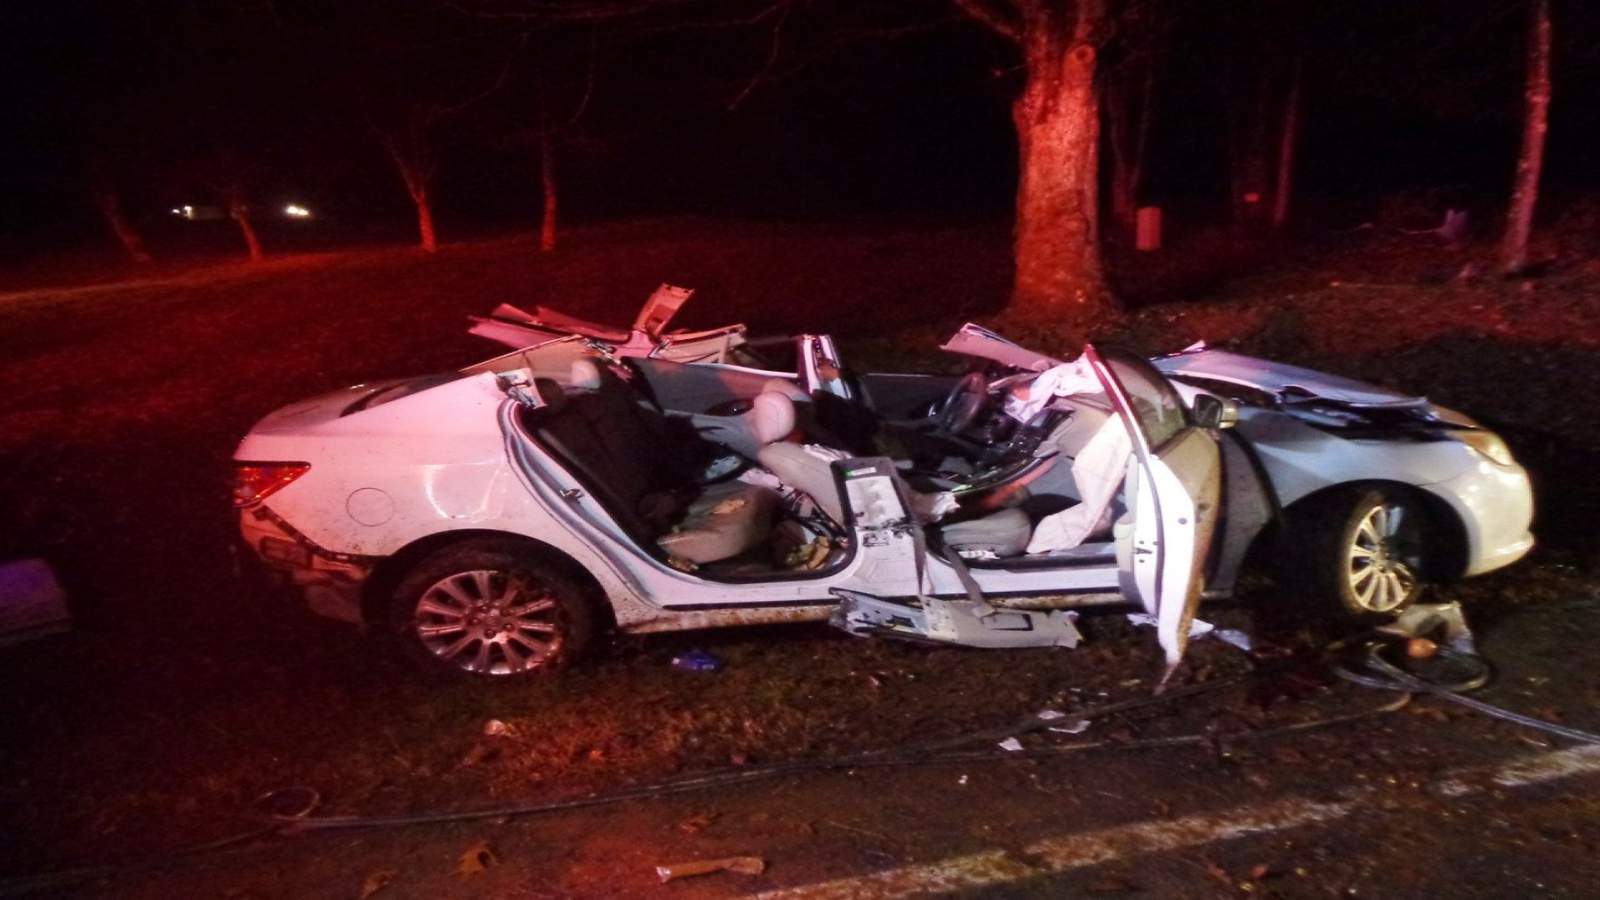 One person in the hospital after Saturday night crash in Bedford County